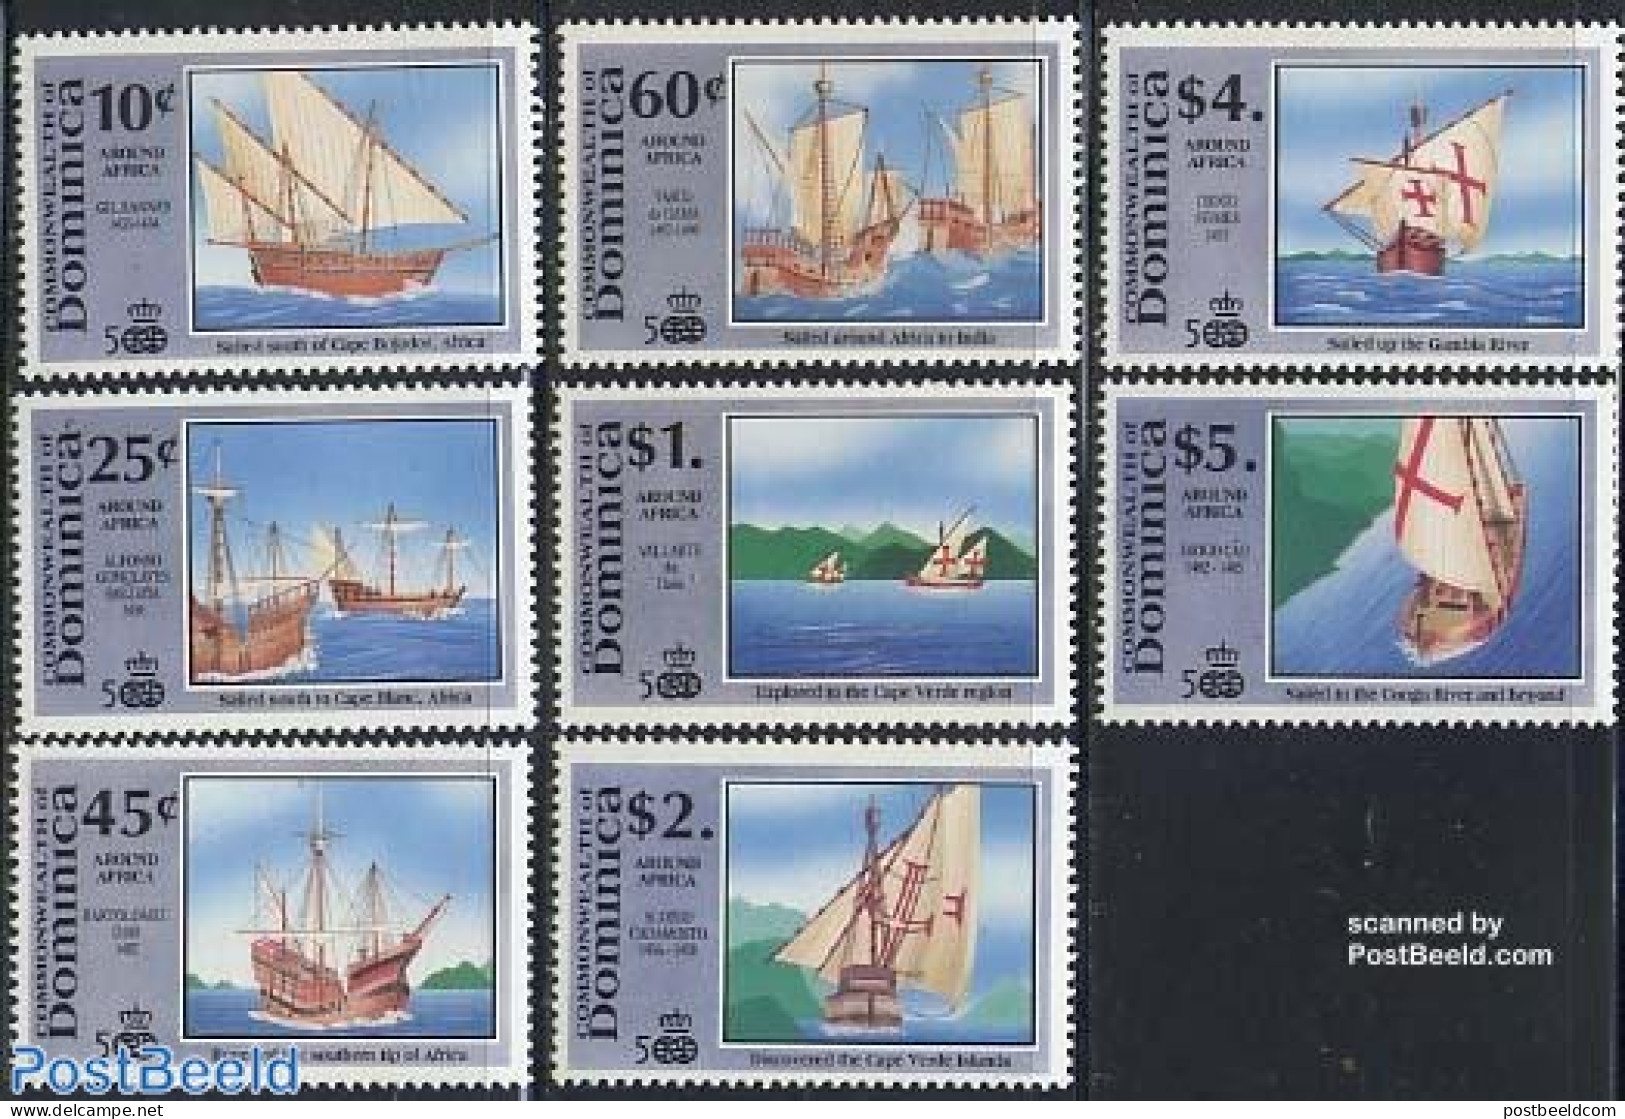 Dominica 1991 Discovery Of America 8v, Mint NH, History - Transport - Explorers - Ships And Boats - Onderzoekers